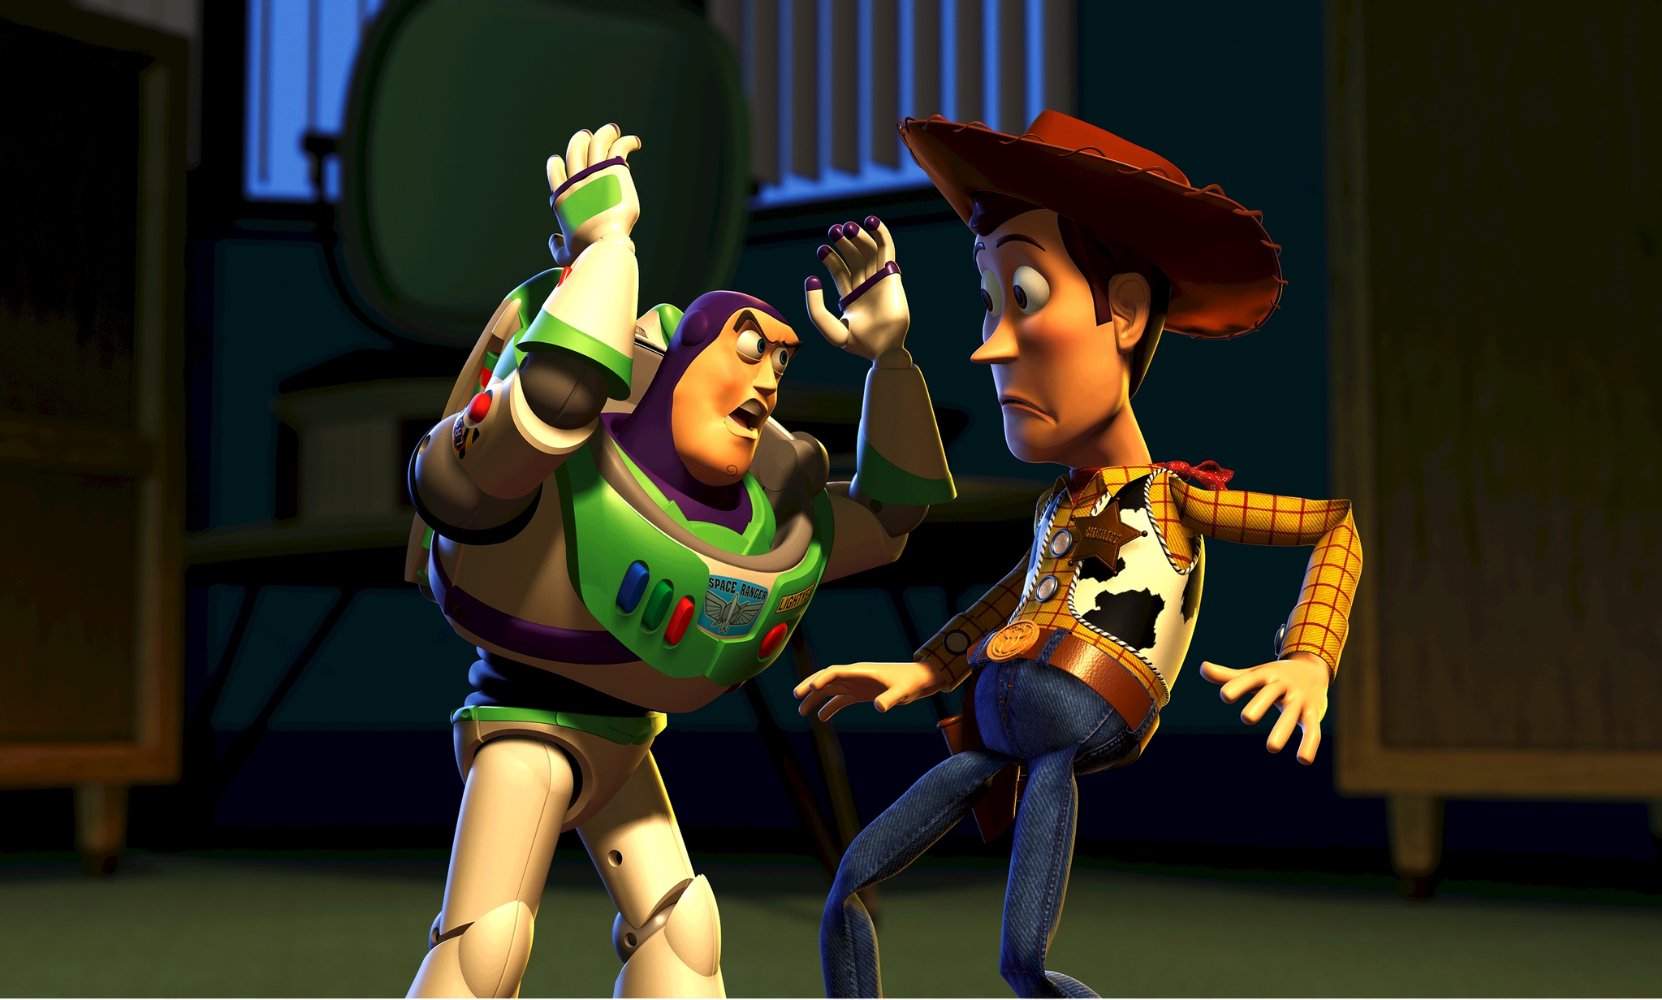 download toy story 2 full movie 123